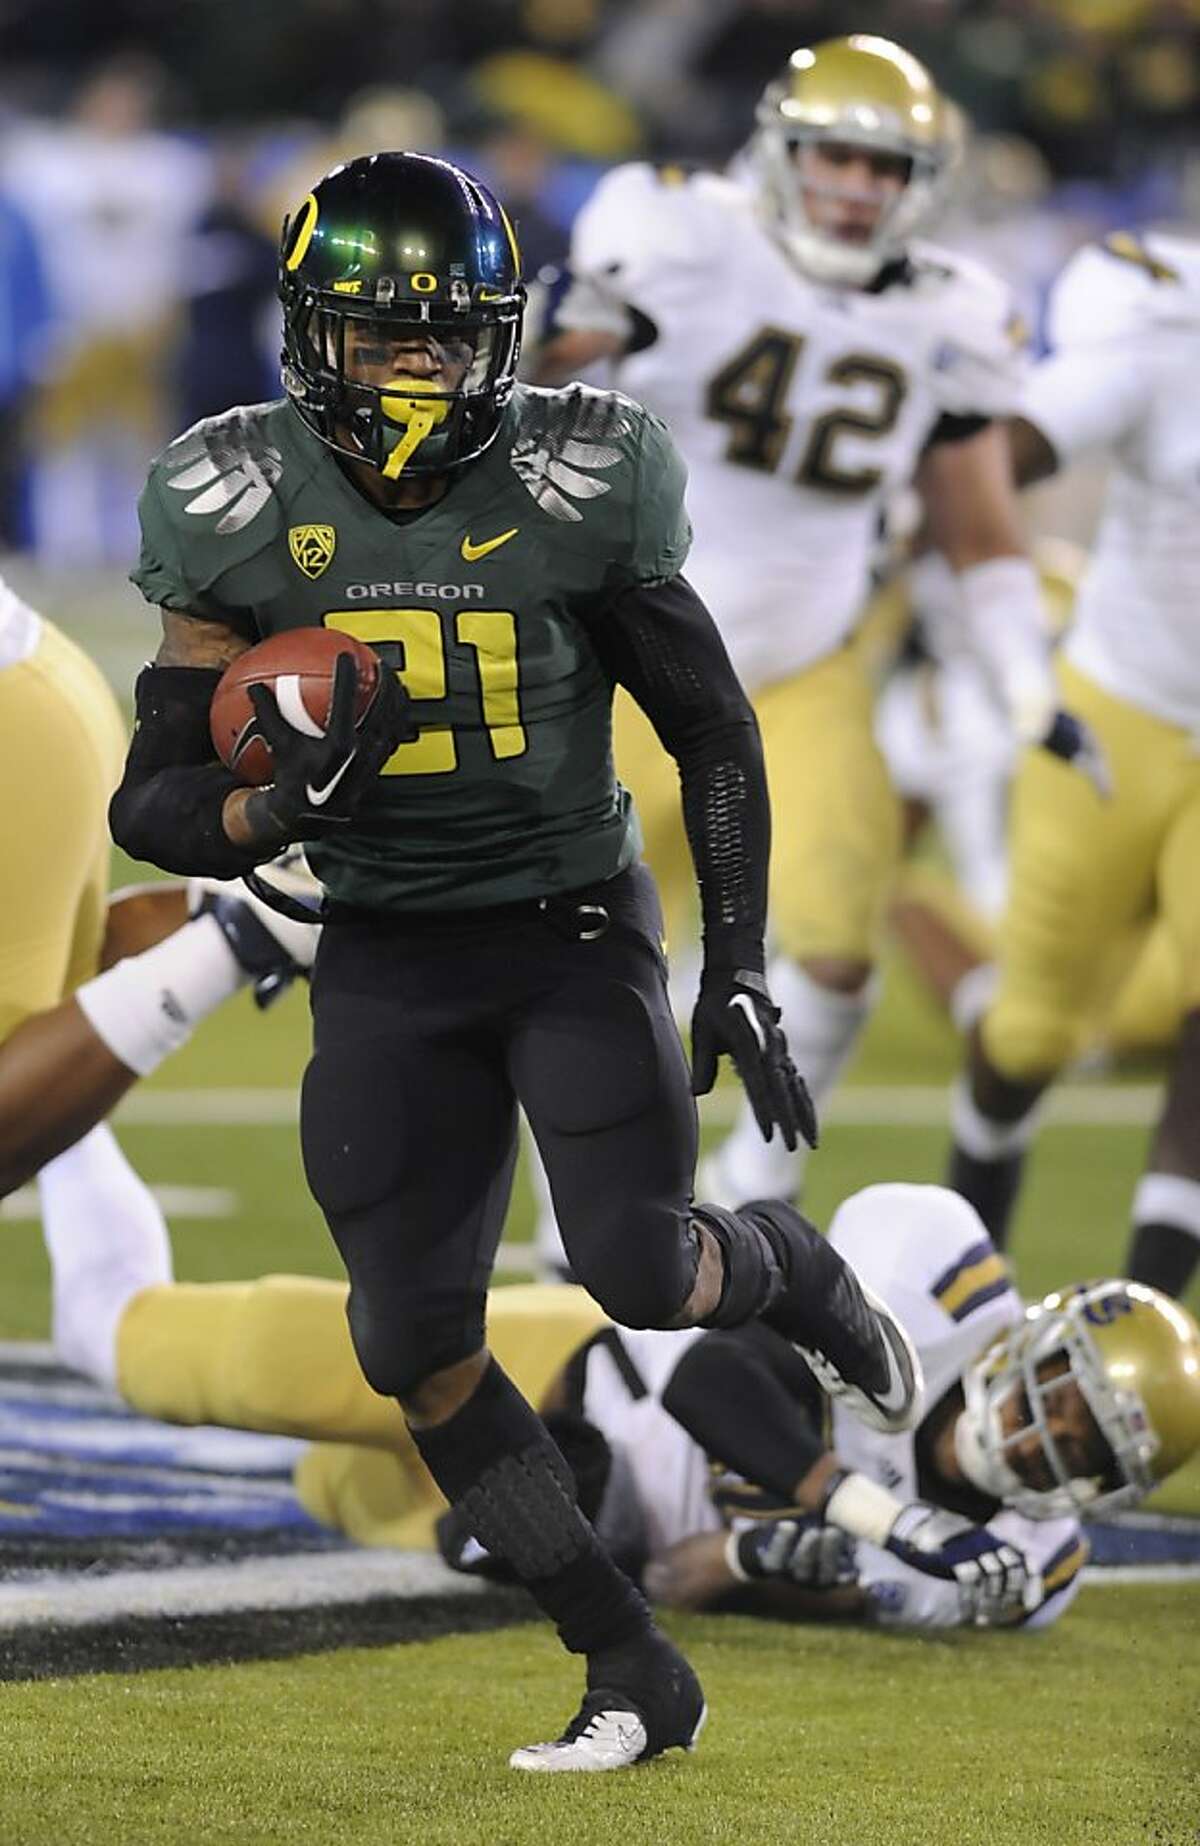 Oregon's LaMichael James (21) runs against UCLA in the first half of the NCAA Pac-12 Championship college football game in Eugene, Ore., Saturday, Dec 2, 2011. (AP Photo/Greg Wahl-Stephens)